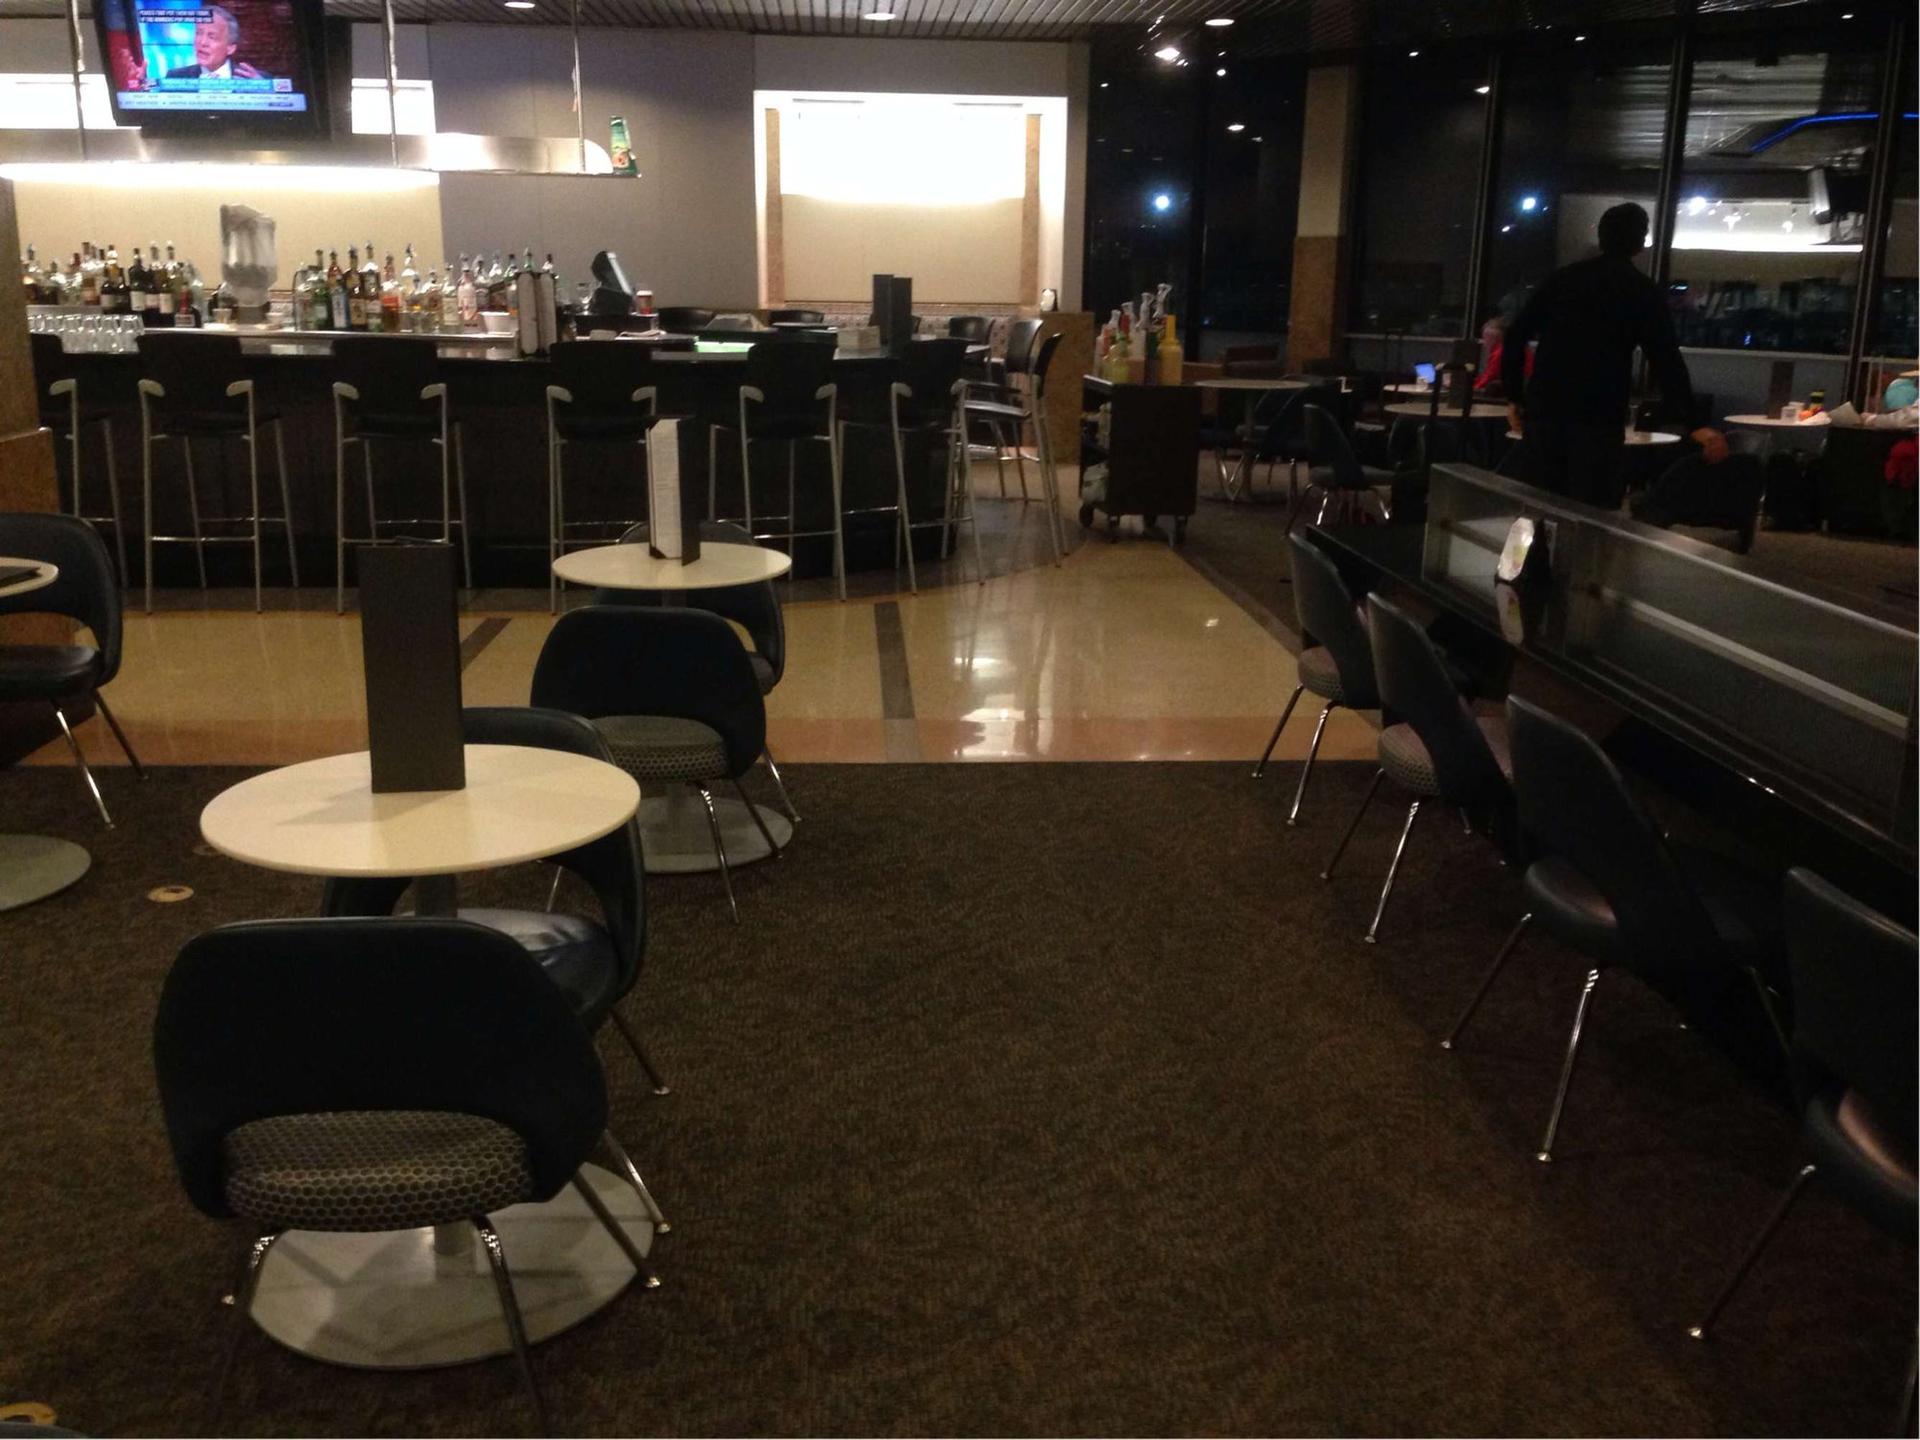 American Airlines Admirals Club image 7 of 50